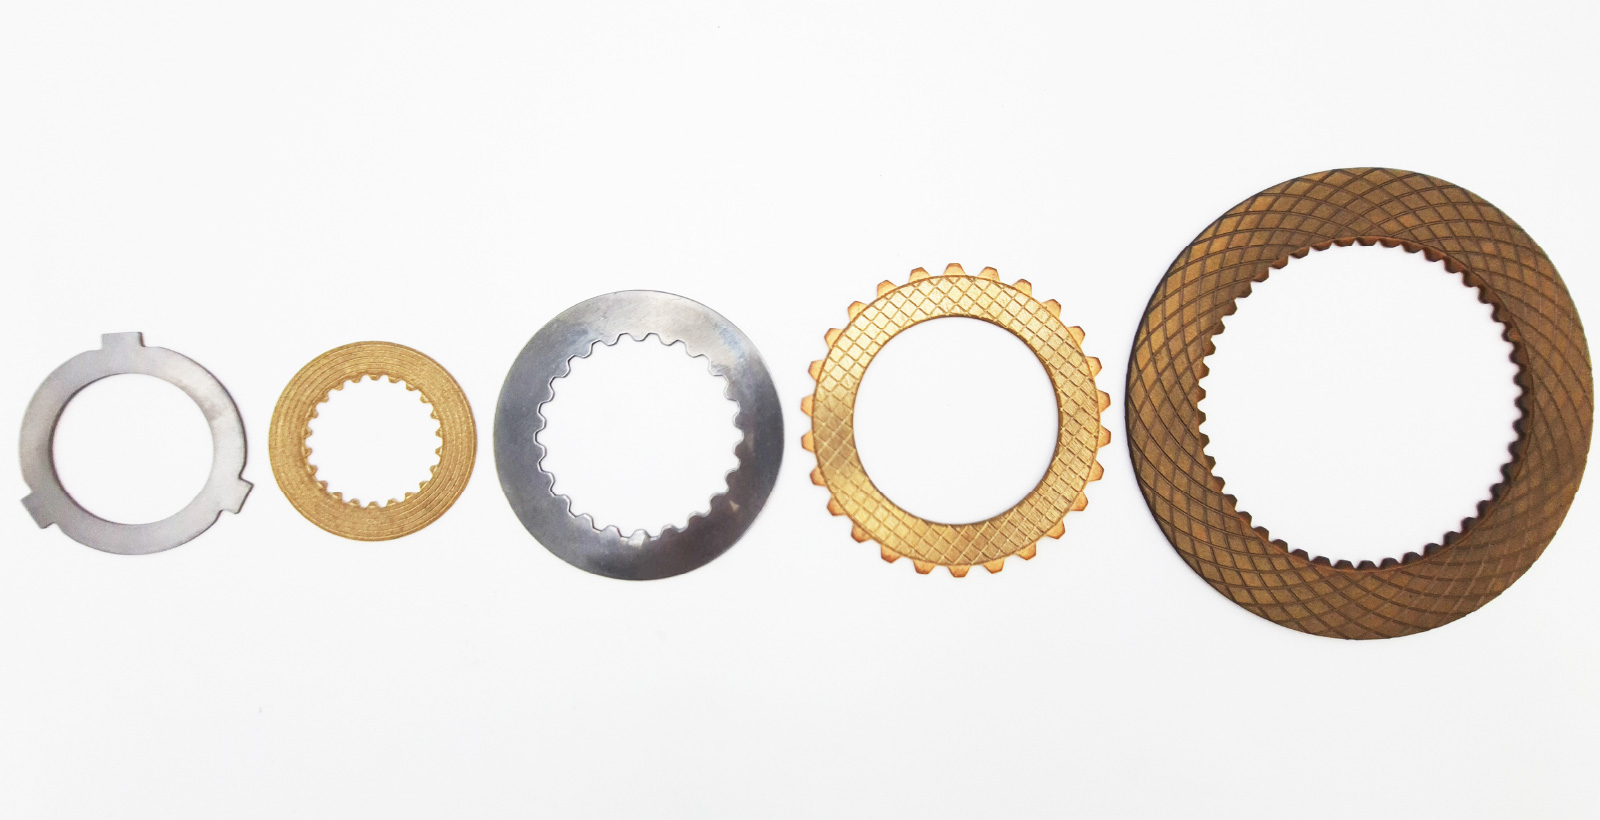 Ceramic Transmission Discs for Food and Dairy Industry